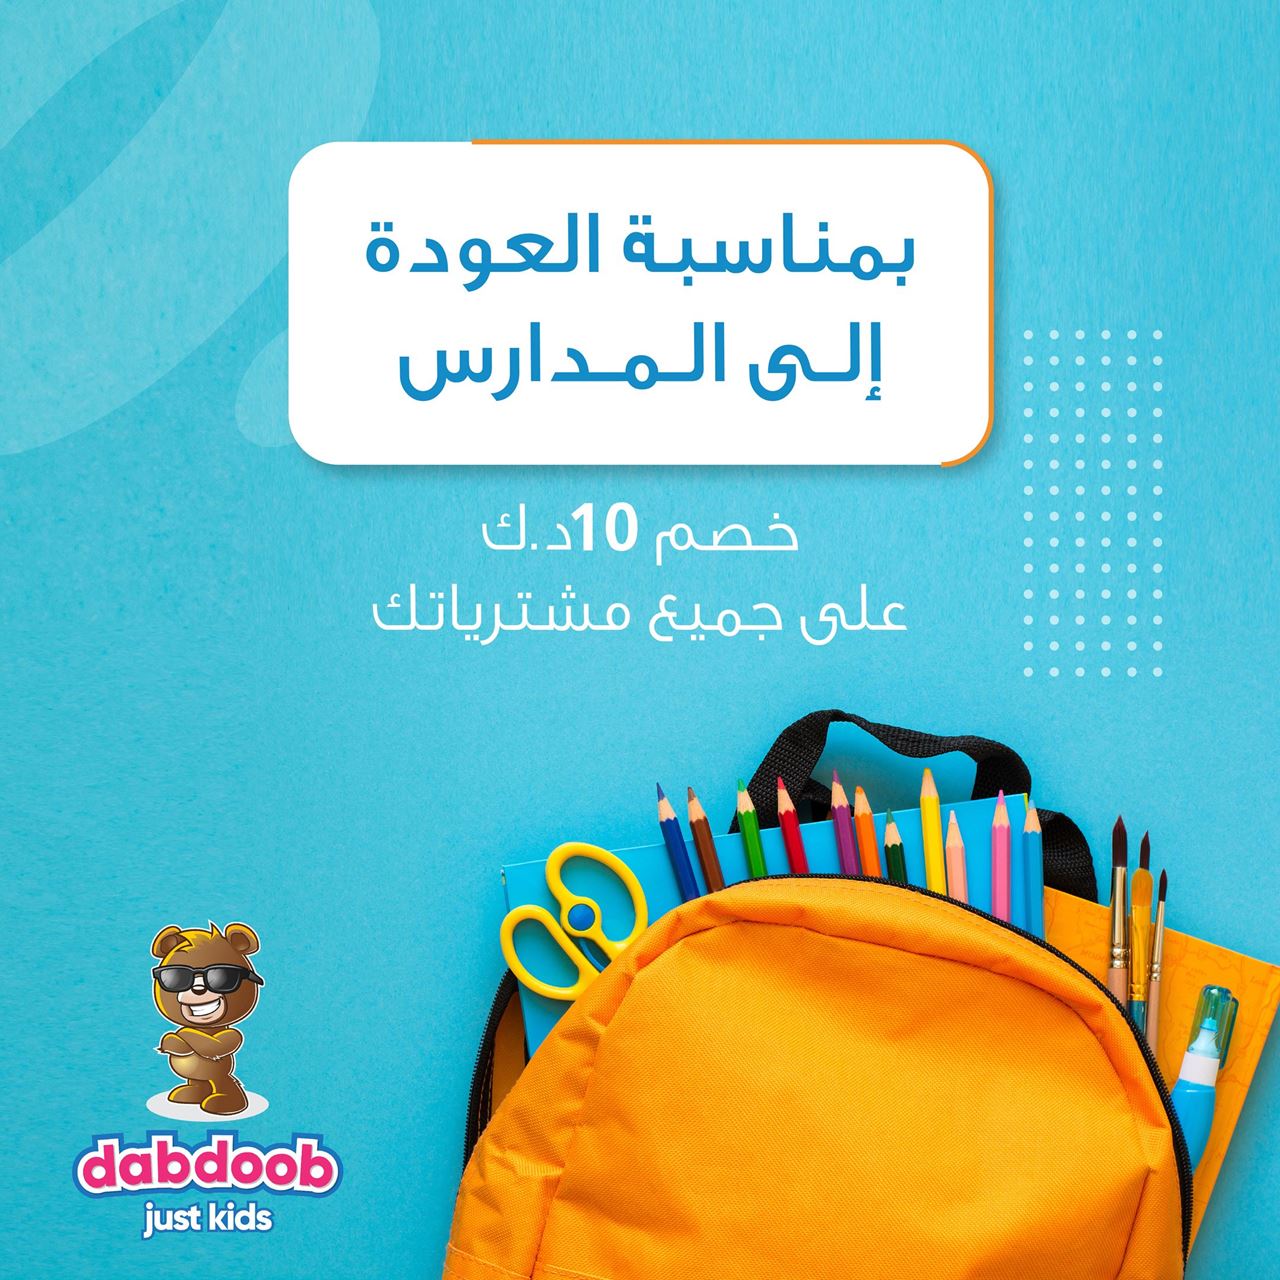 Burgan Bank Launches an Exclusive Back to School Offer in Collaboration with Dabdoob